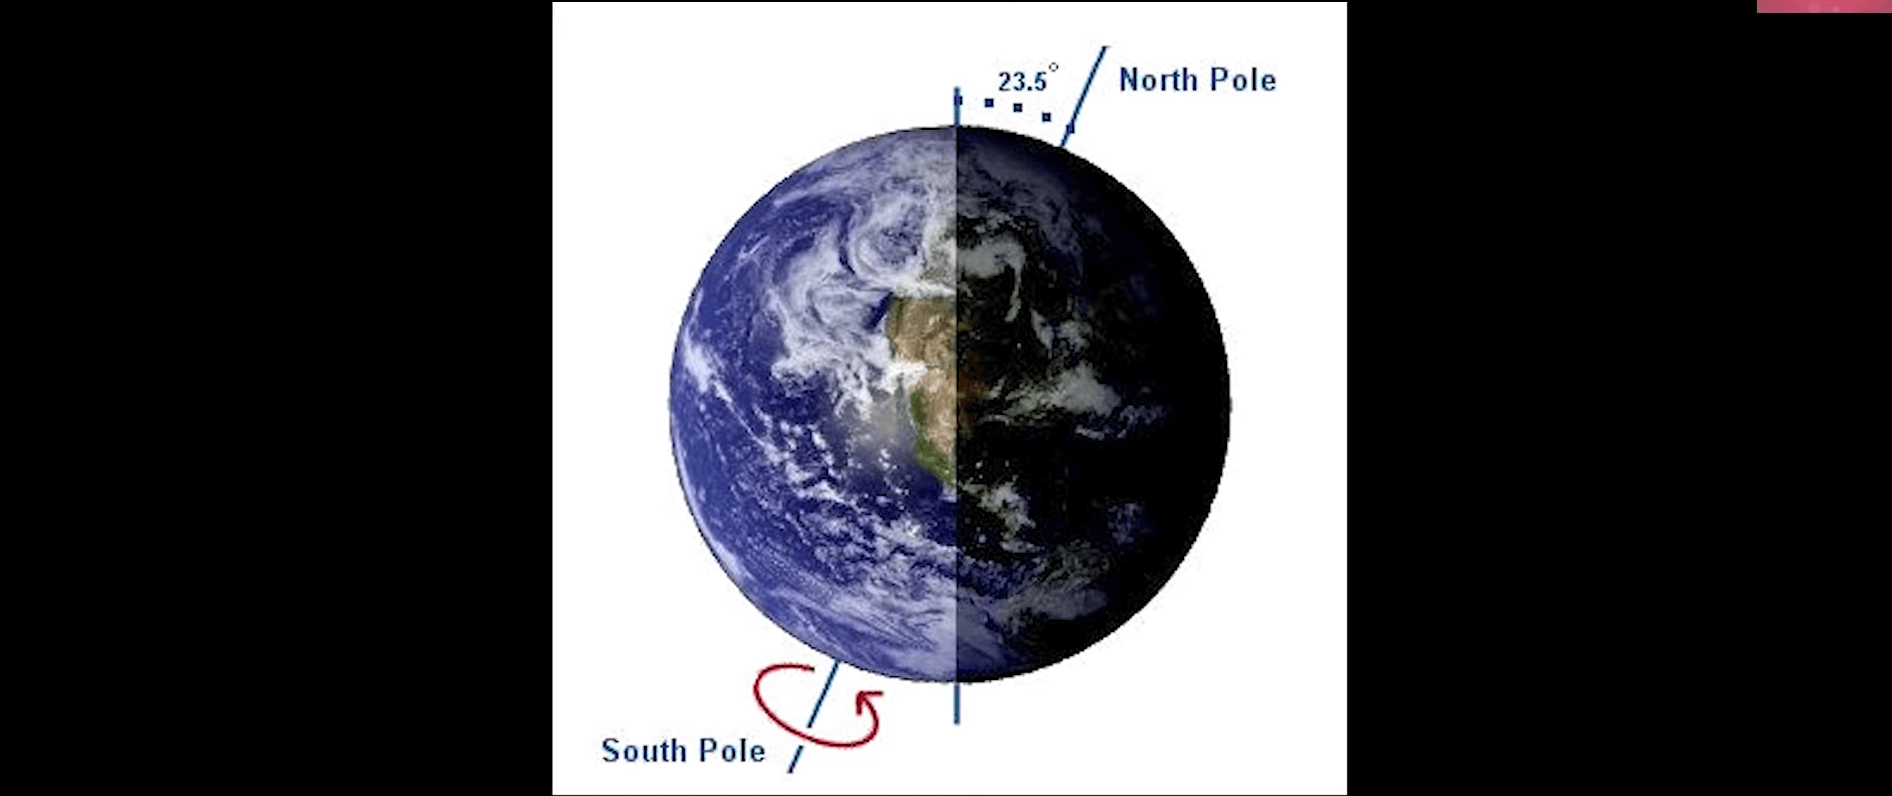 The earth rotates at around 23.5 degrees to the axis